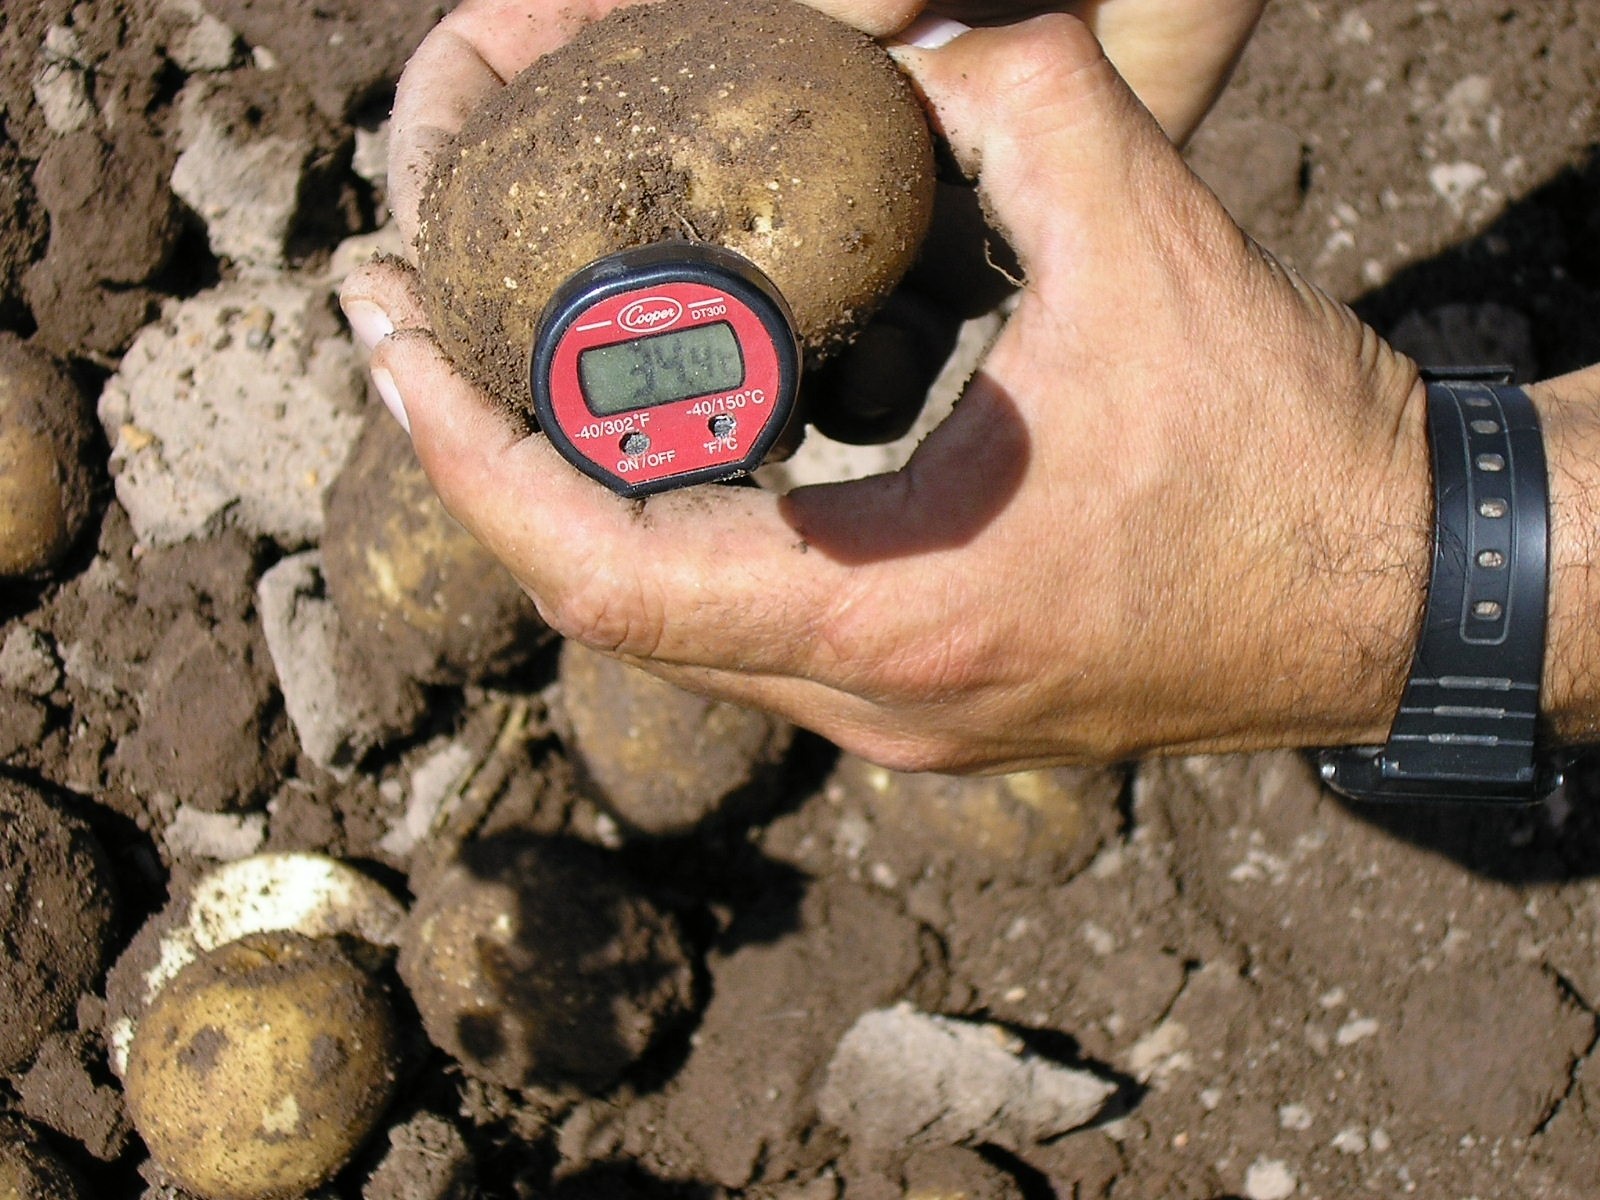 Tubers arriving at over 30°C stop growing and present irregularities when growth resumes.